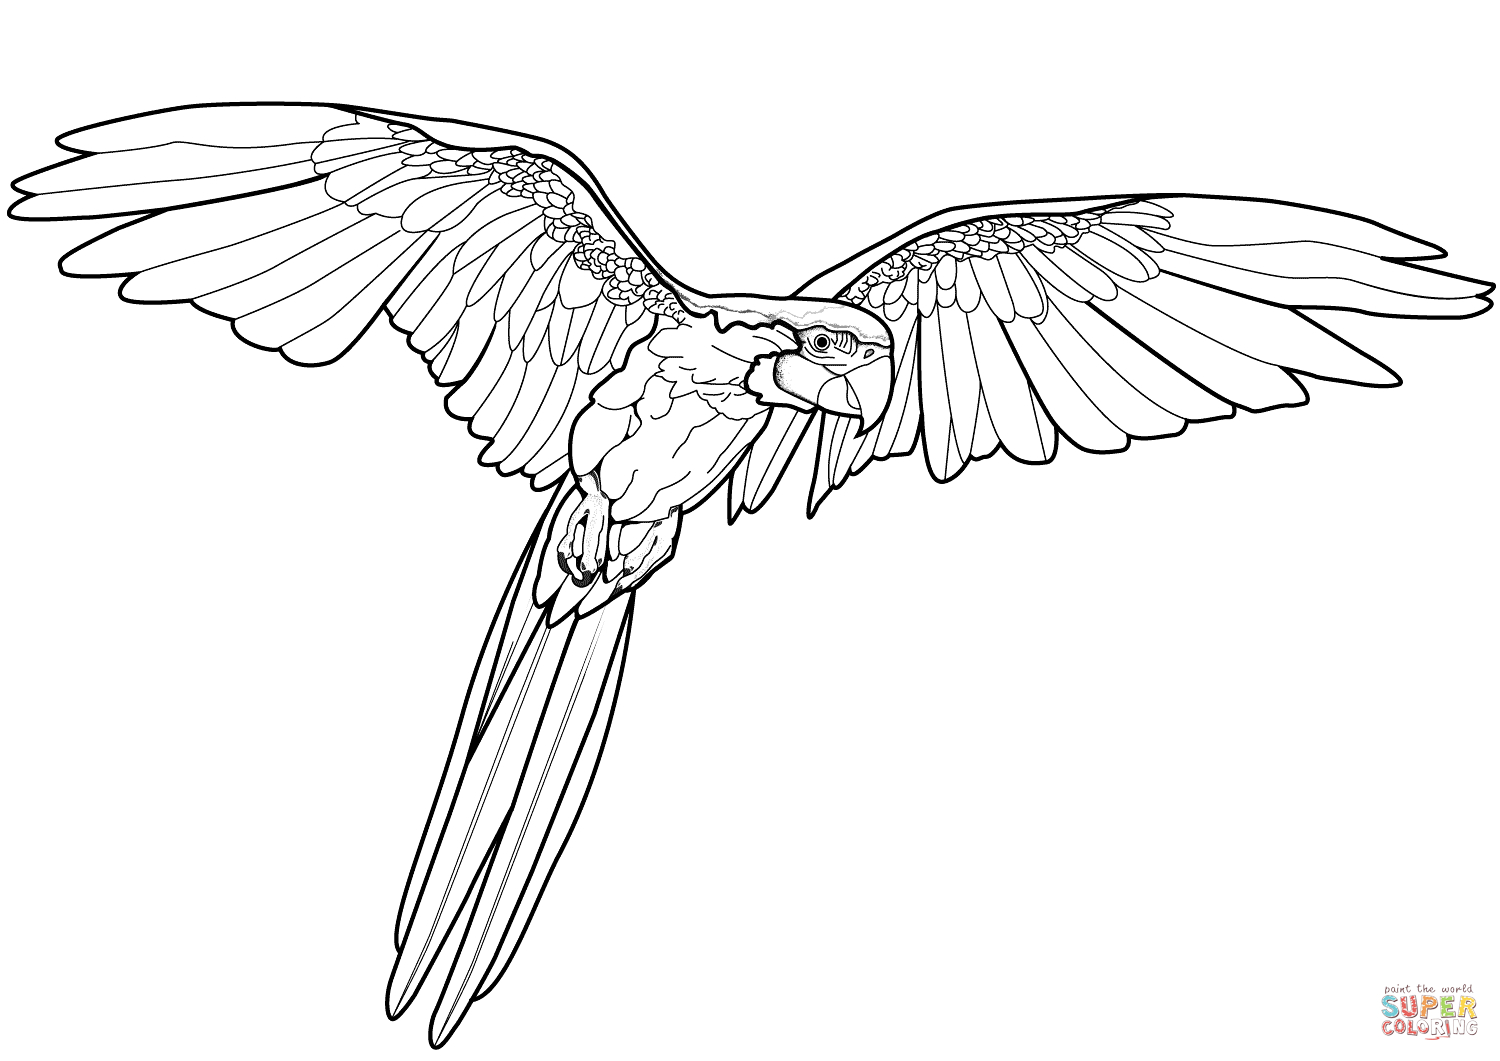 Flying Parrot Coloring Page | Free Printable Coloring Pages - Free Printable Parrot Coloring Pages